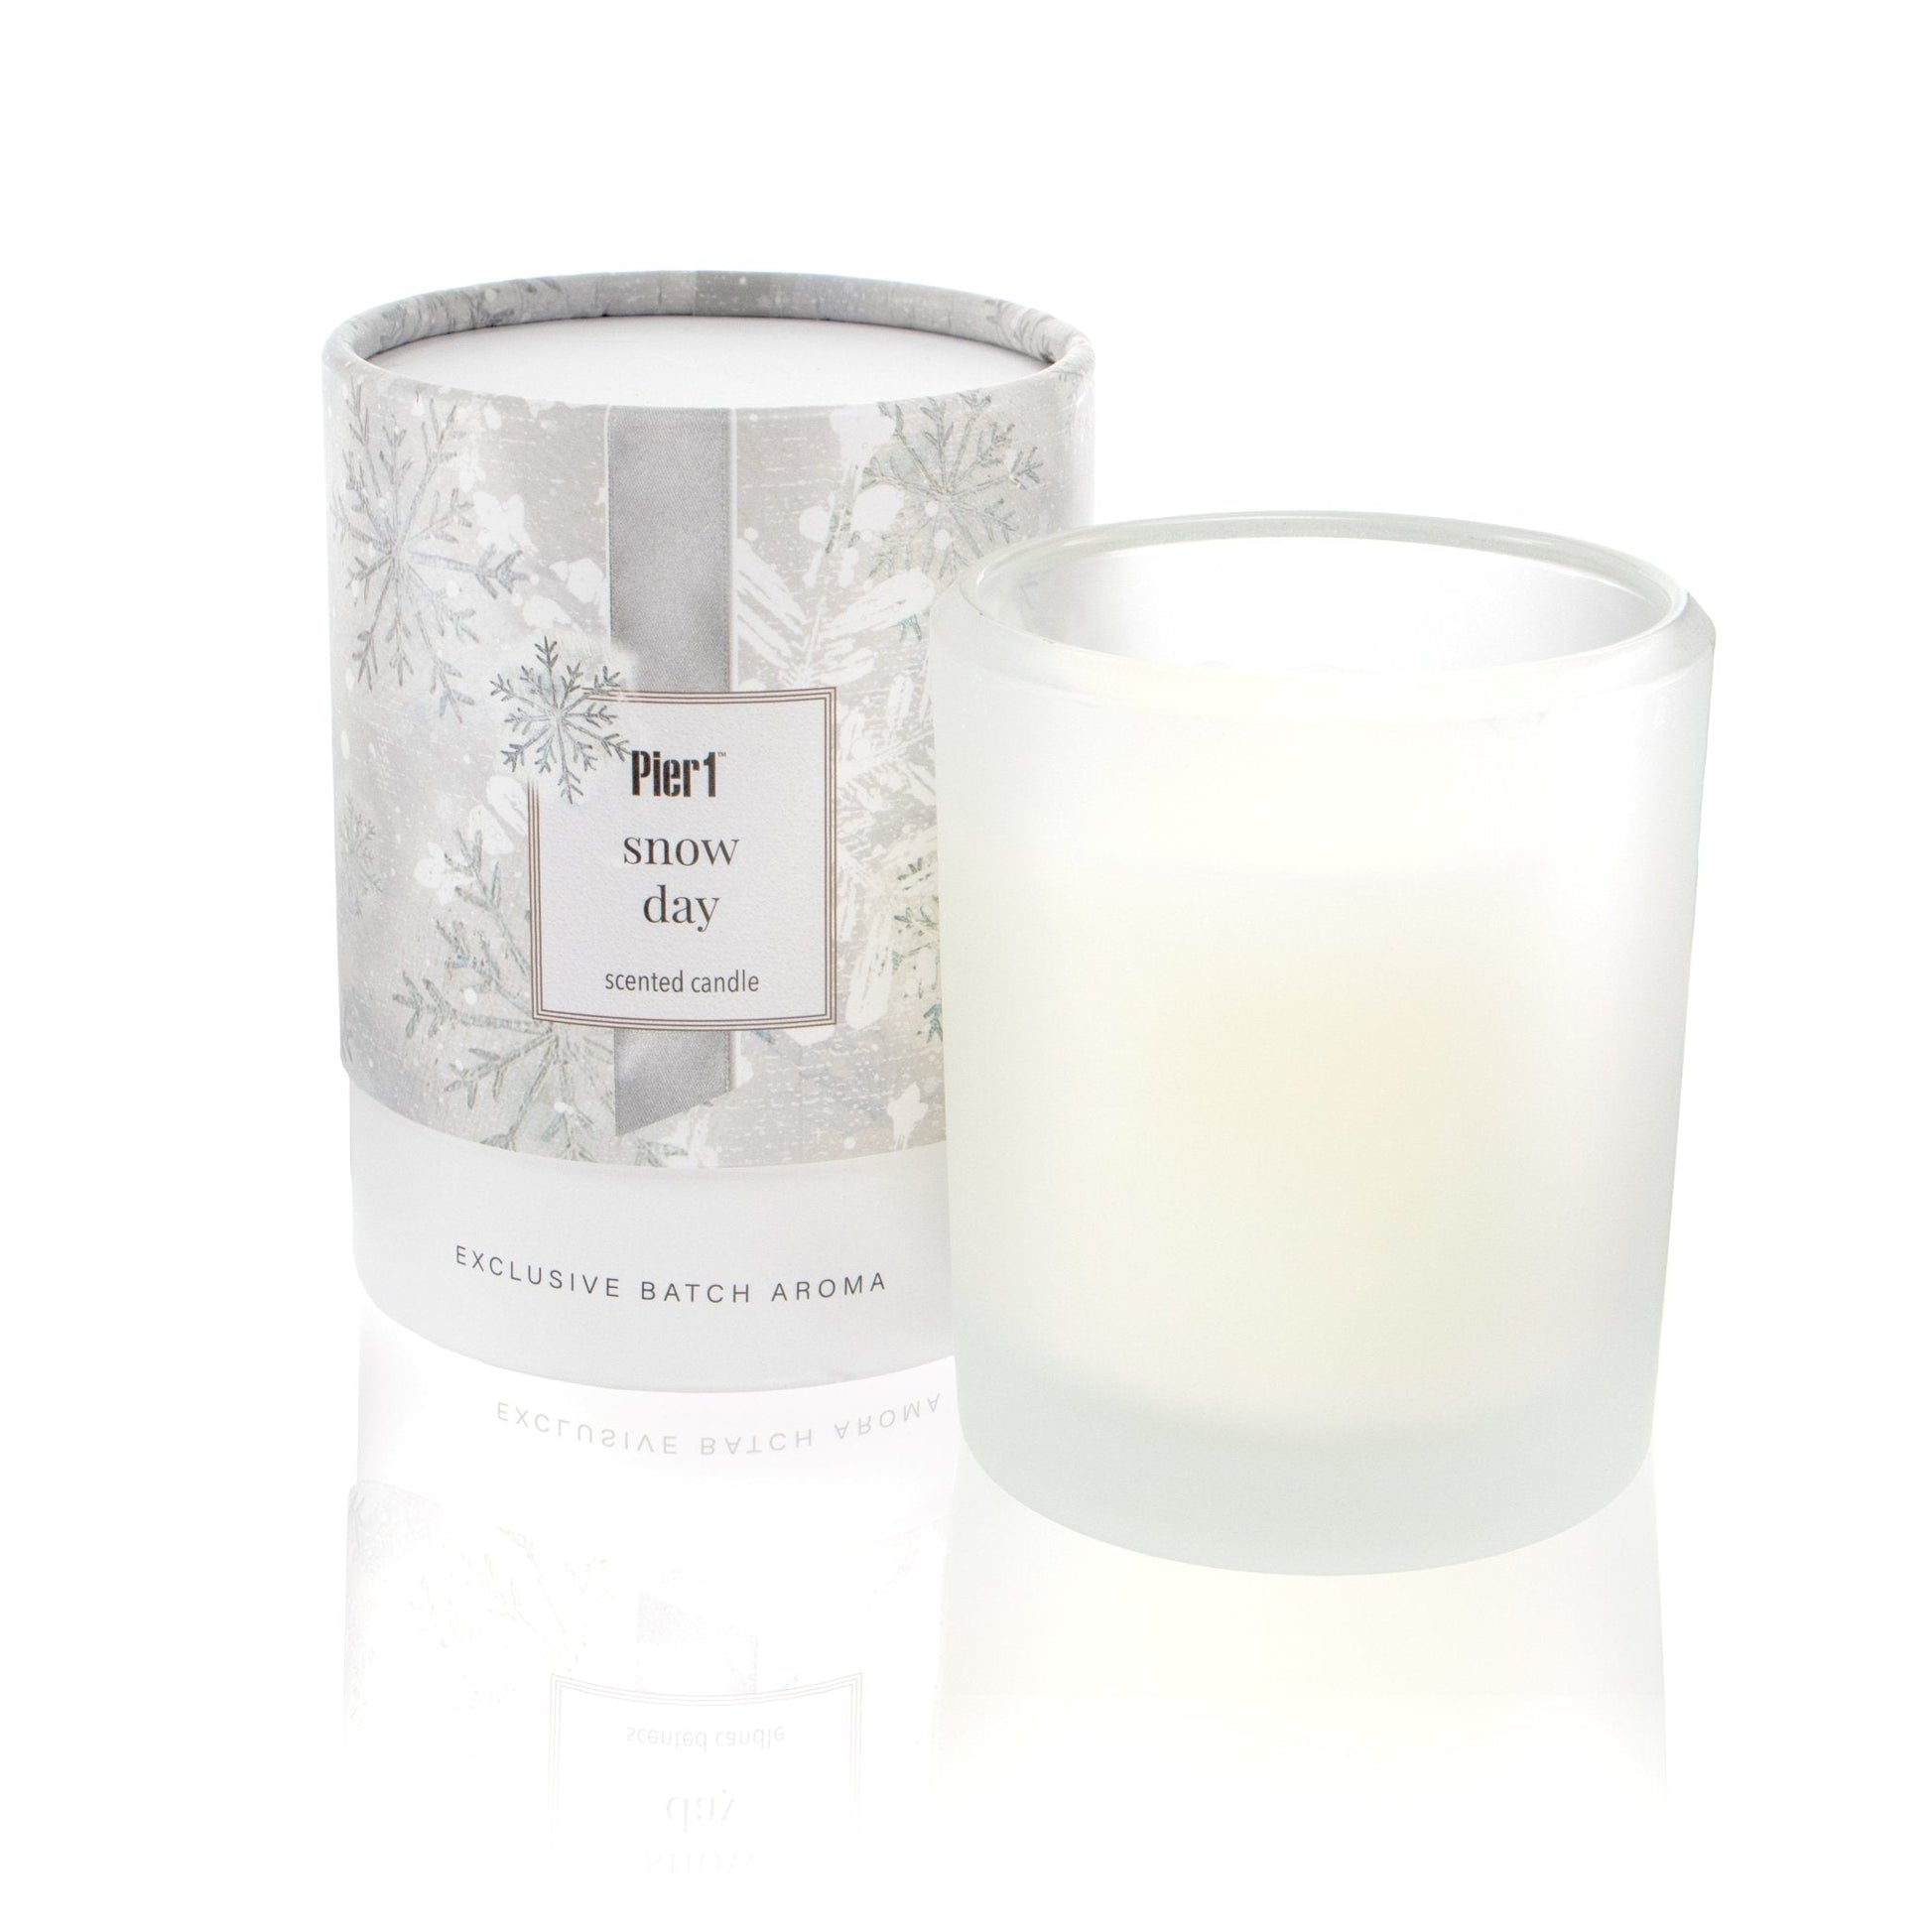 Pier 1 Snow Day 8oz Boxed Soy Candle - Pier 1